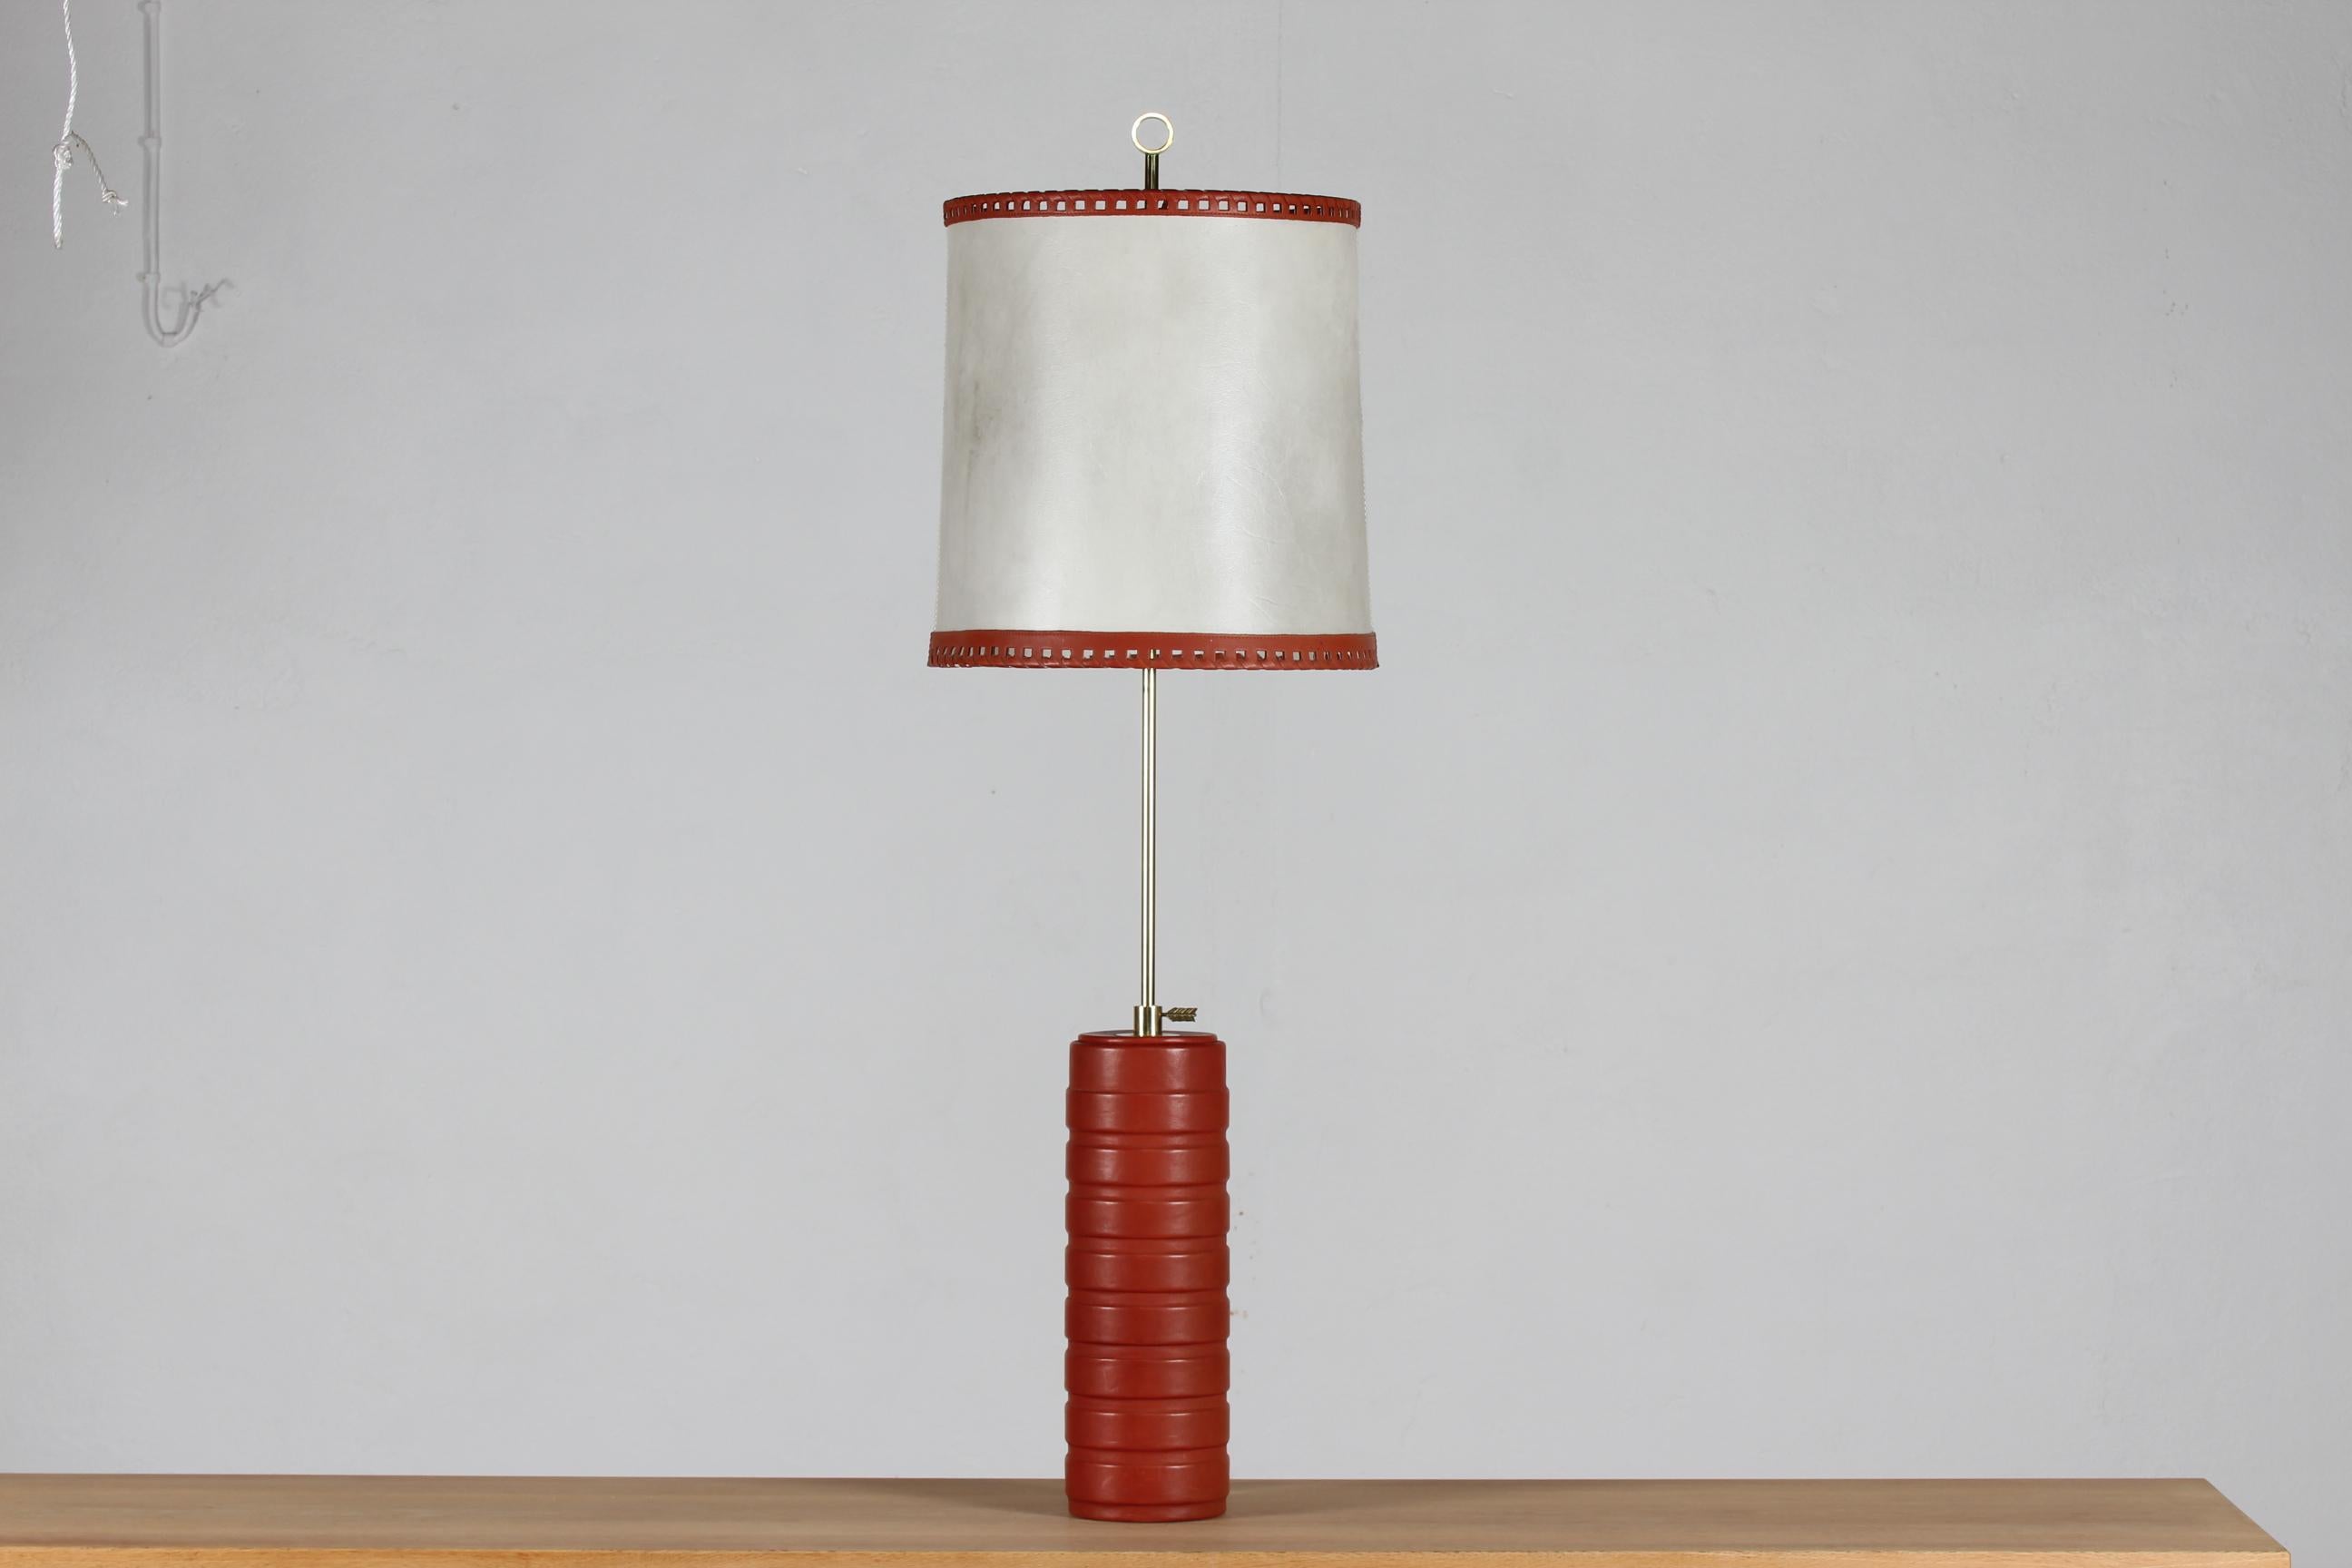 Mid century Scandinavian light design.

Tall and large height adjustable table or desk lamp from the 1960´s - even large enough for floor use
It is made of red-brown leather with an off white leather shade and with fittings of